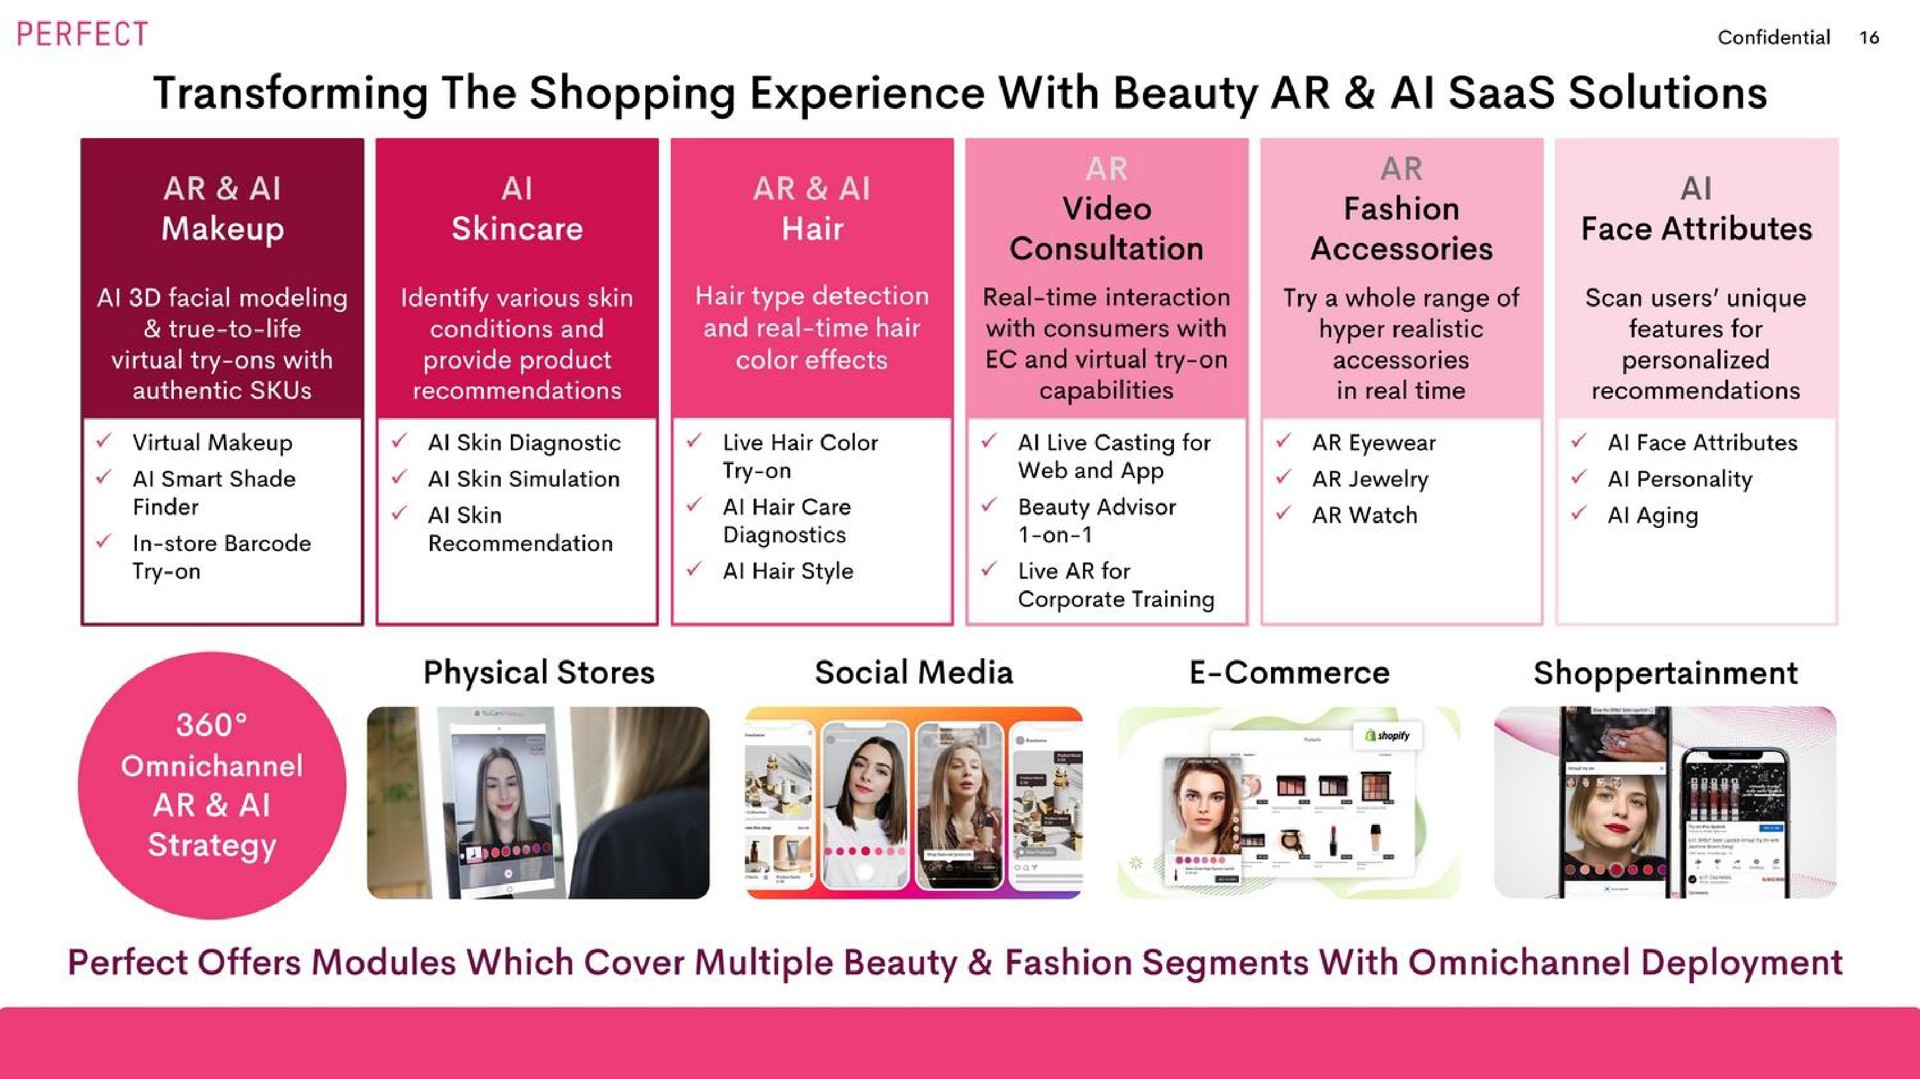 transforming the shopping experience with beauty solutions perfect offers modules which cover multiple beauty fashion segments with deployment | Perfect